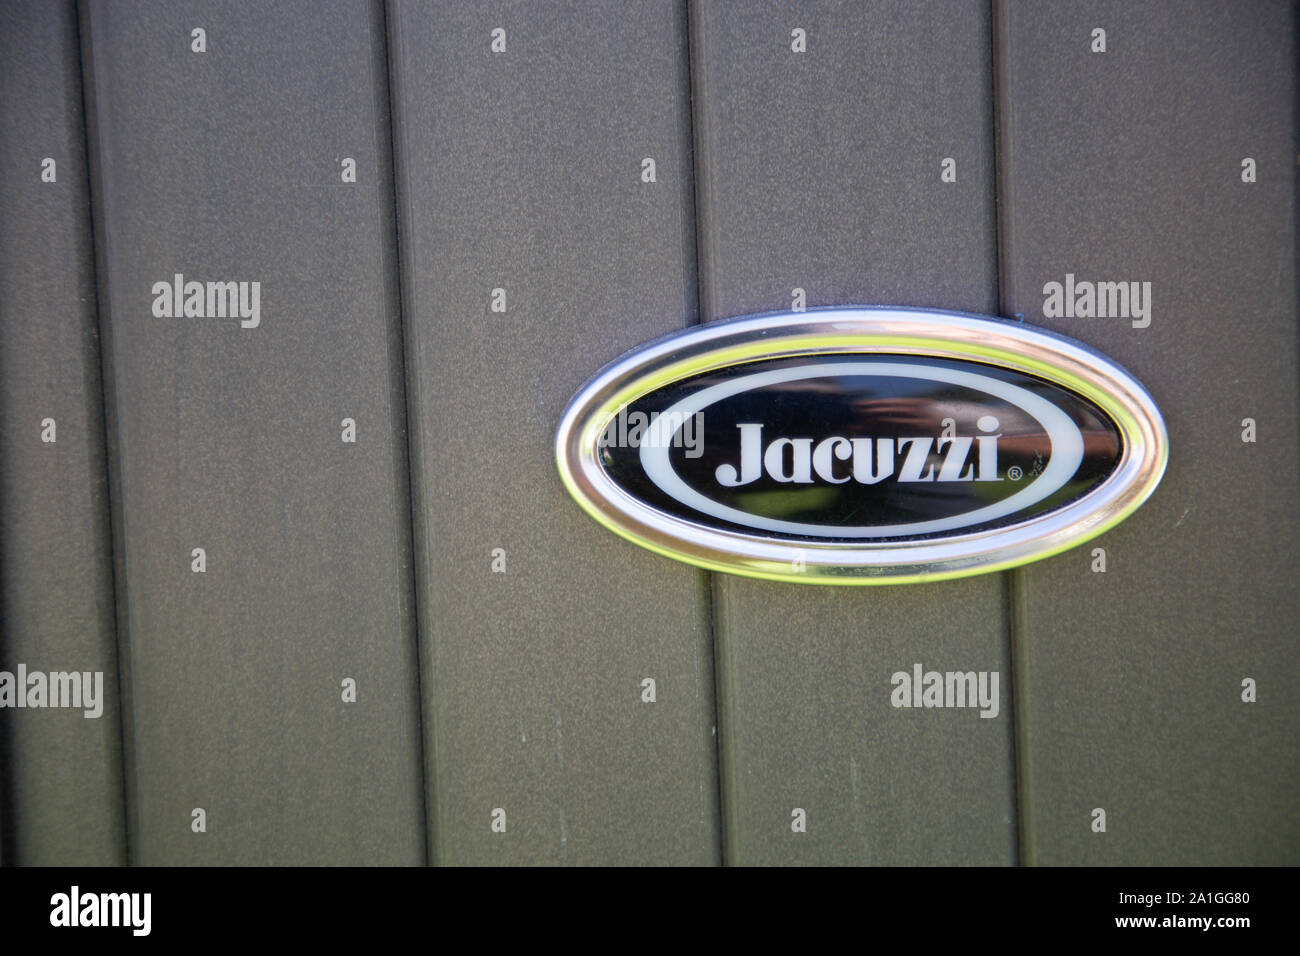 Bordeaux, France - June 2, 2019: Close up on the jacuzzi logo. Jacuzzi is the name of a trademark whirlpool bath, named after the Italian inventor Roy Stock Photo